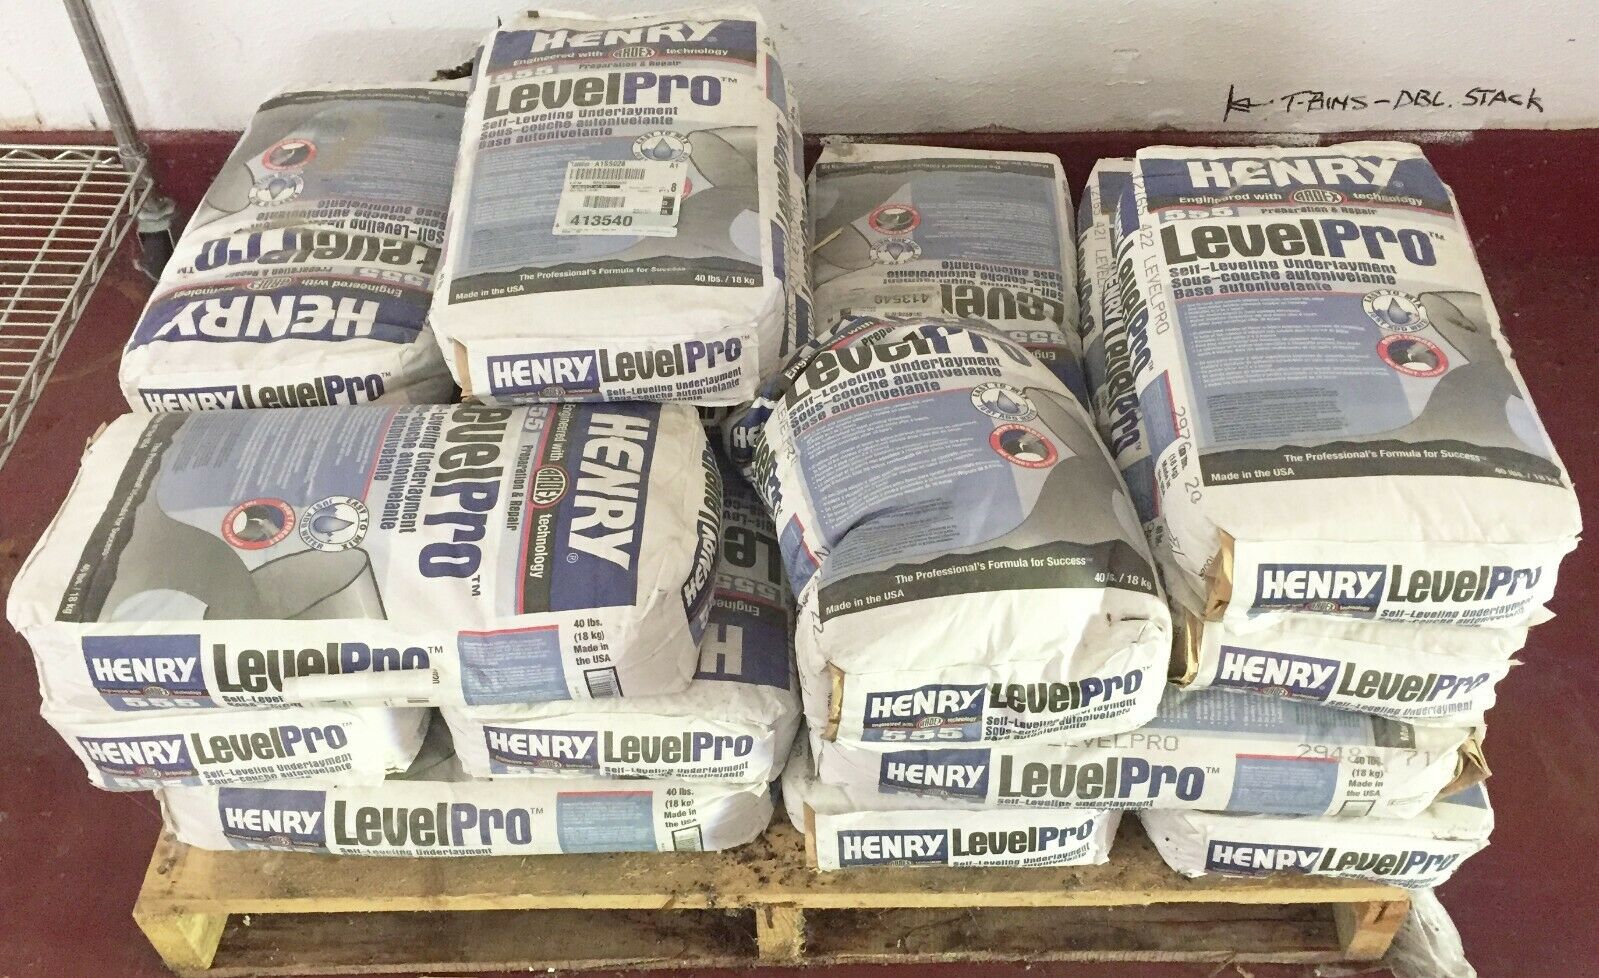 Henry Self-Leveling Underlayment Cement Bags. (15- 40 lbs bag) Sell as a Lot